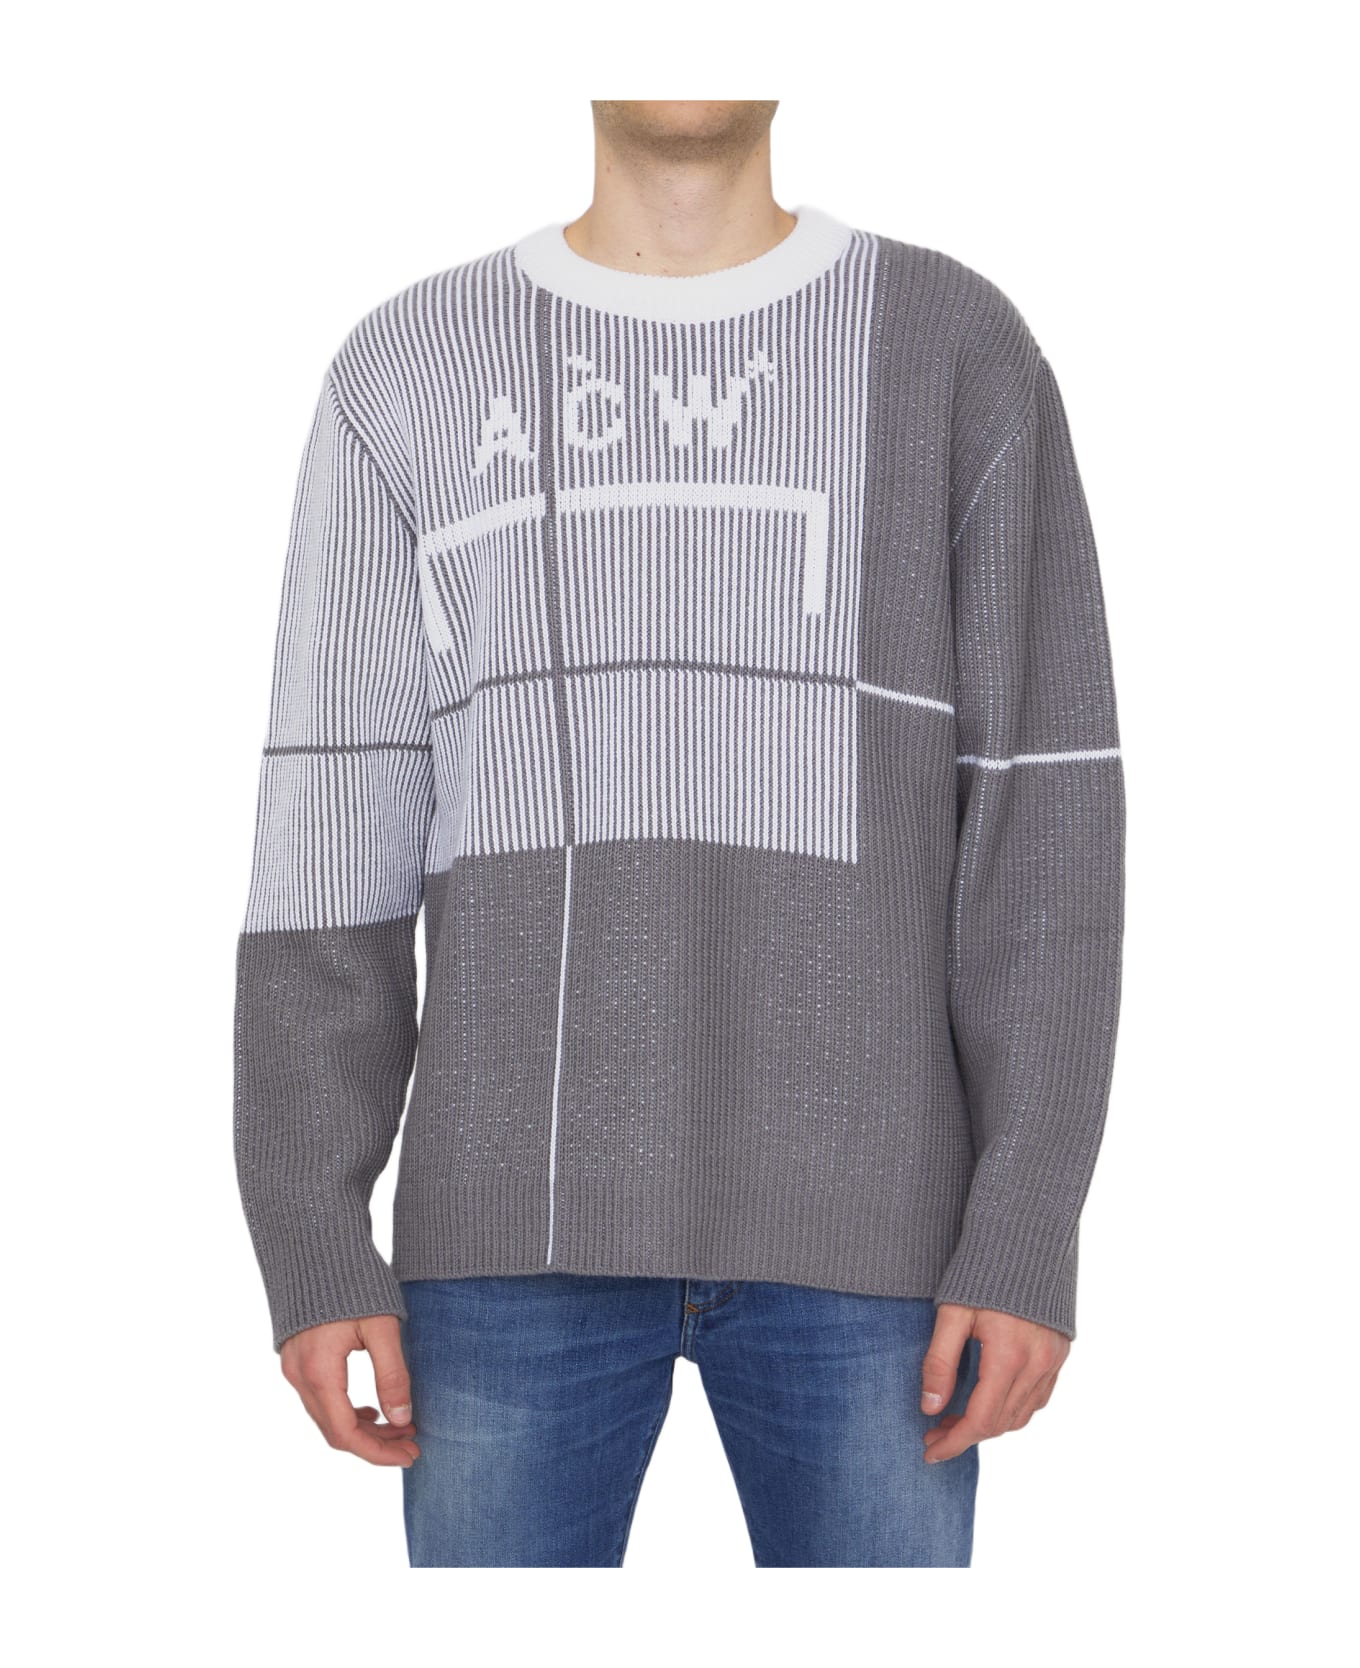 A-COLD-WALL Grid Sweater - GREY ニットウェア